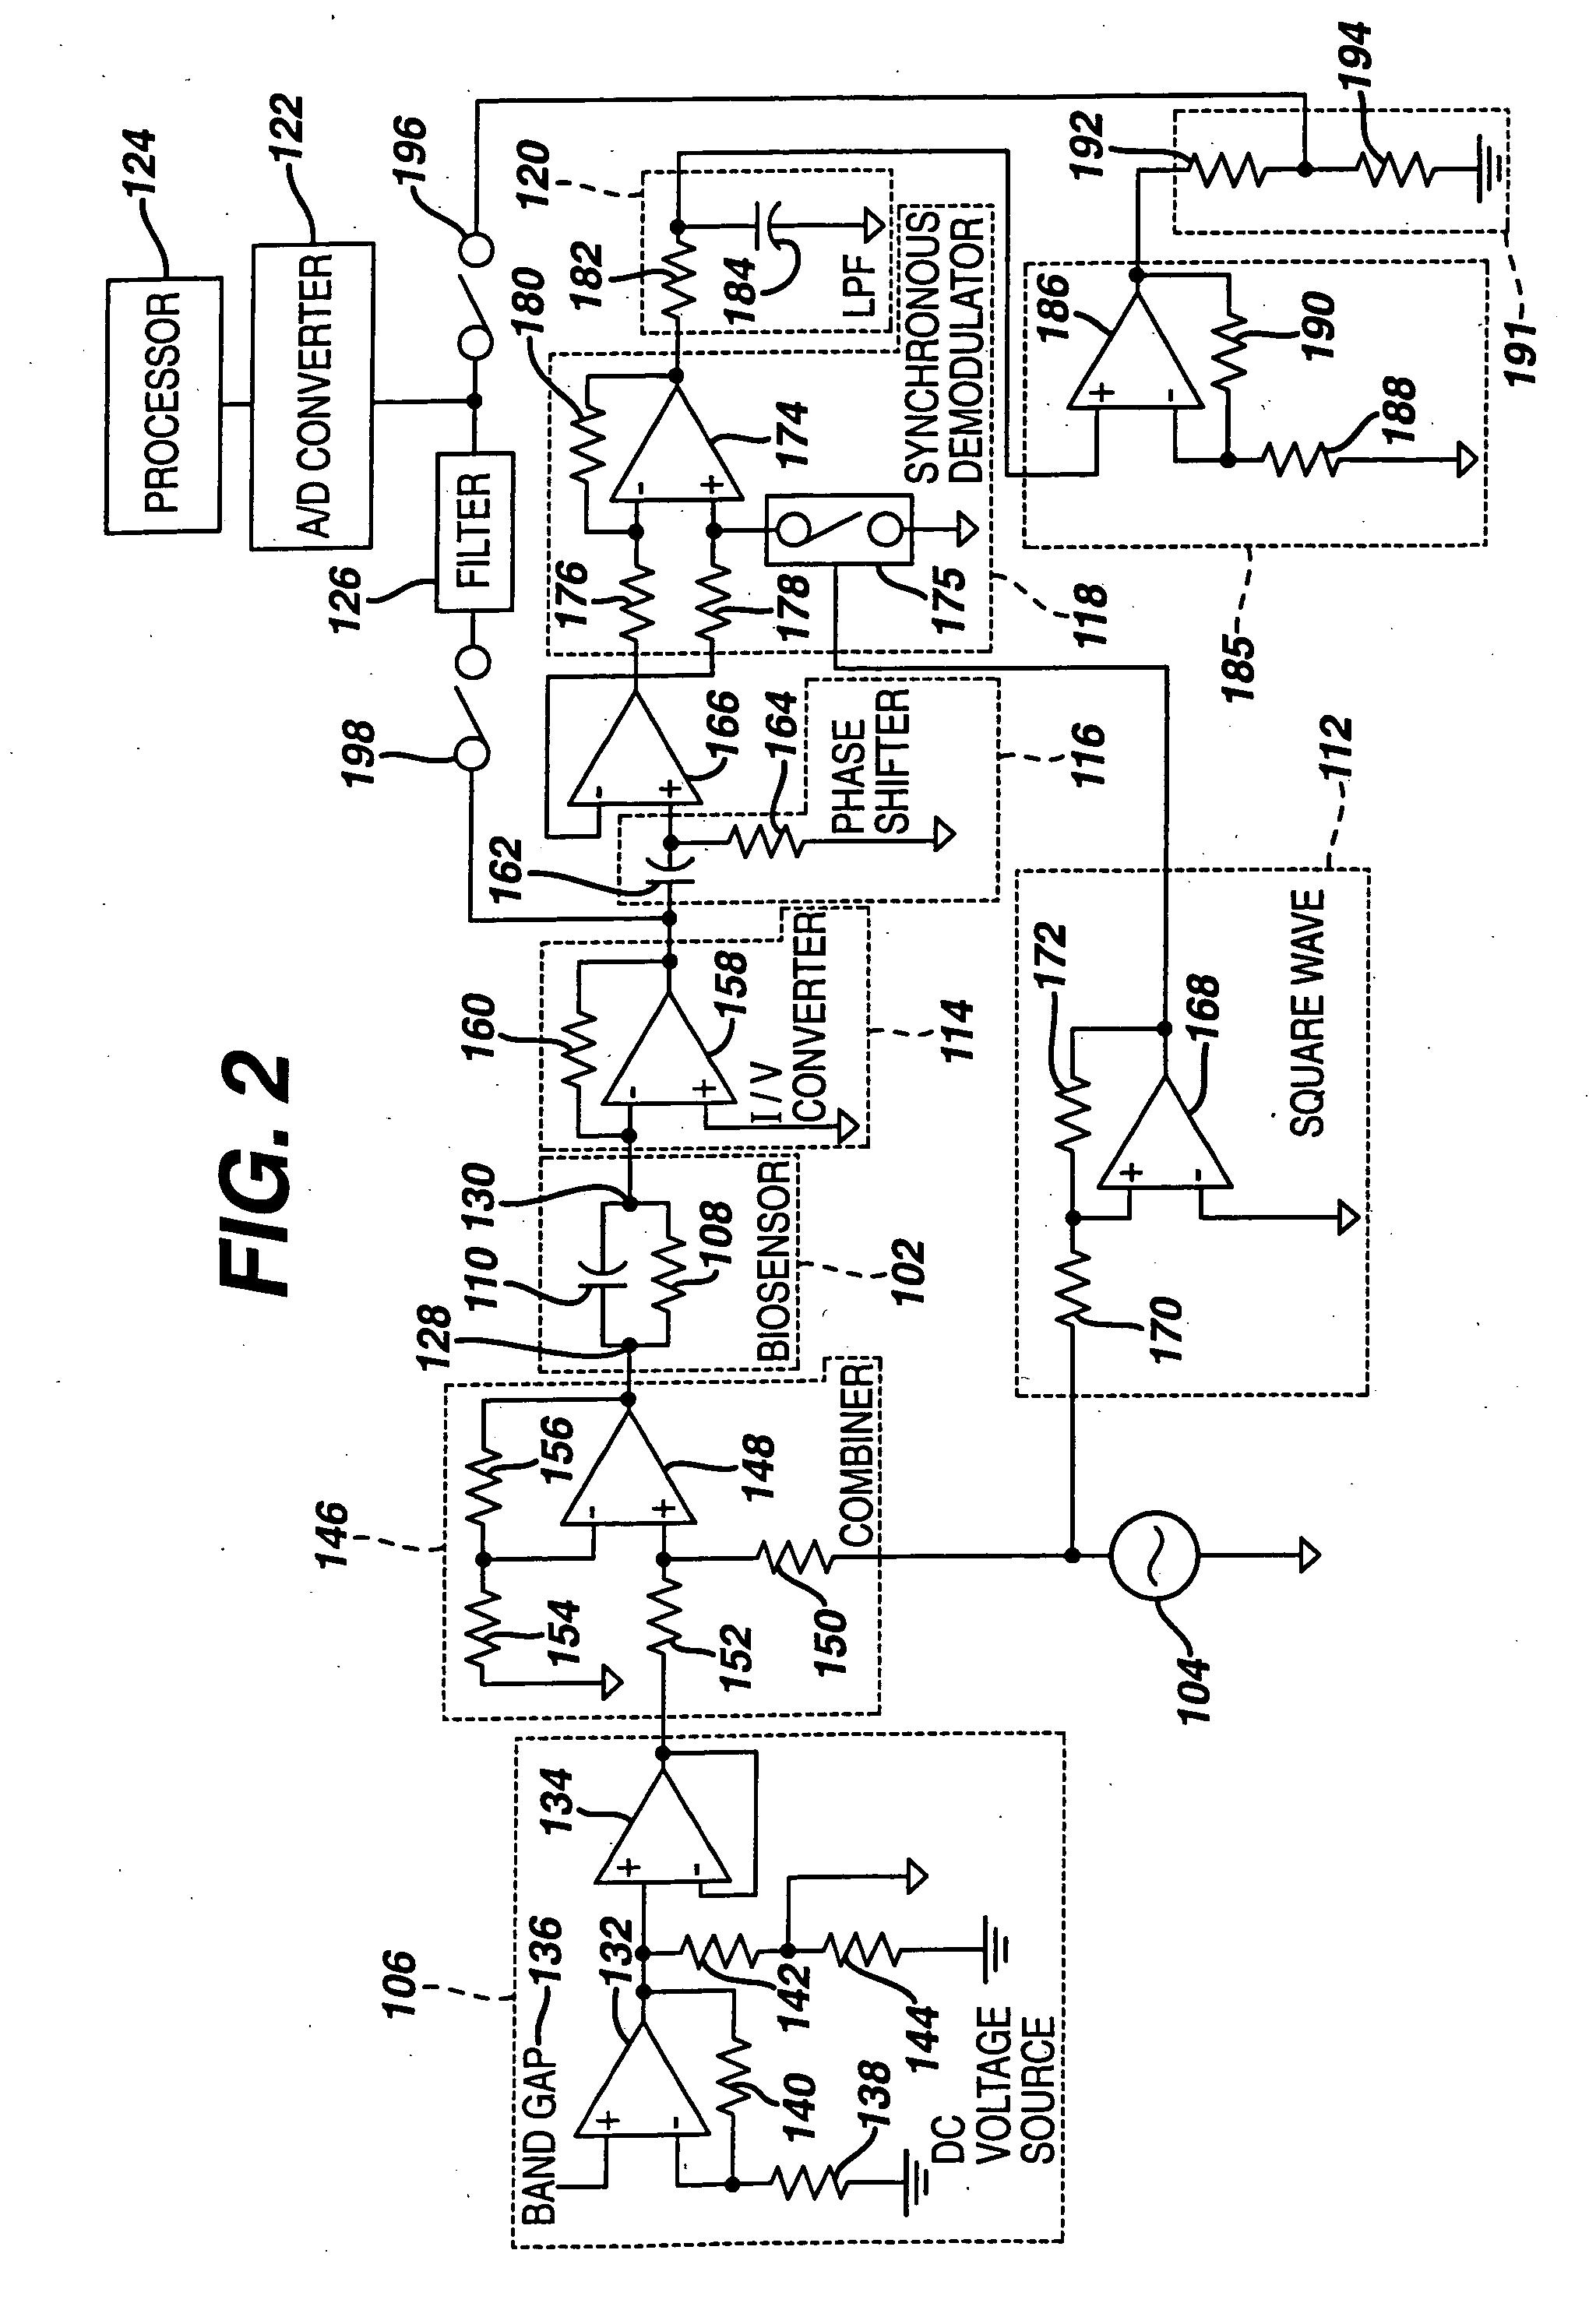 Biosensor apparatus and method with sample type and volume detection